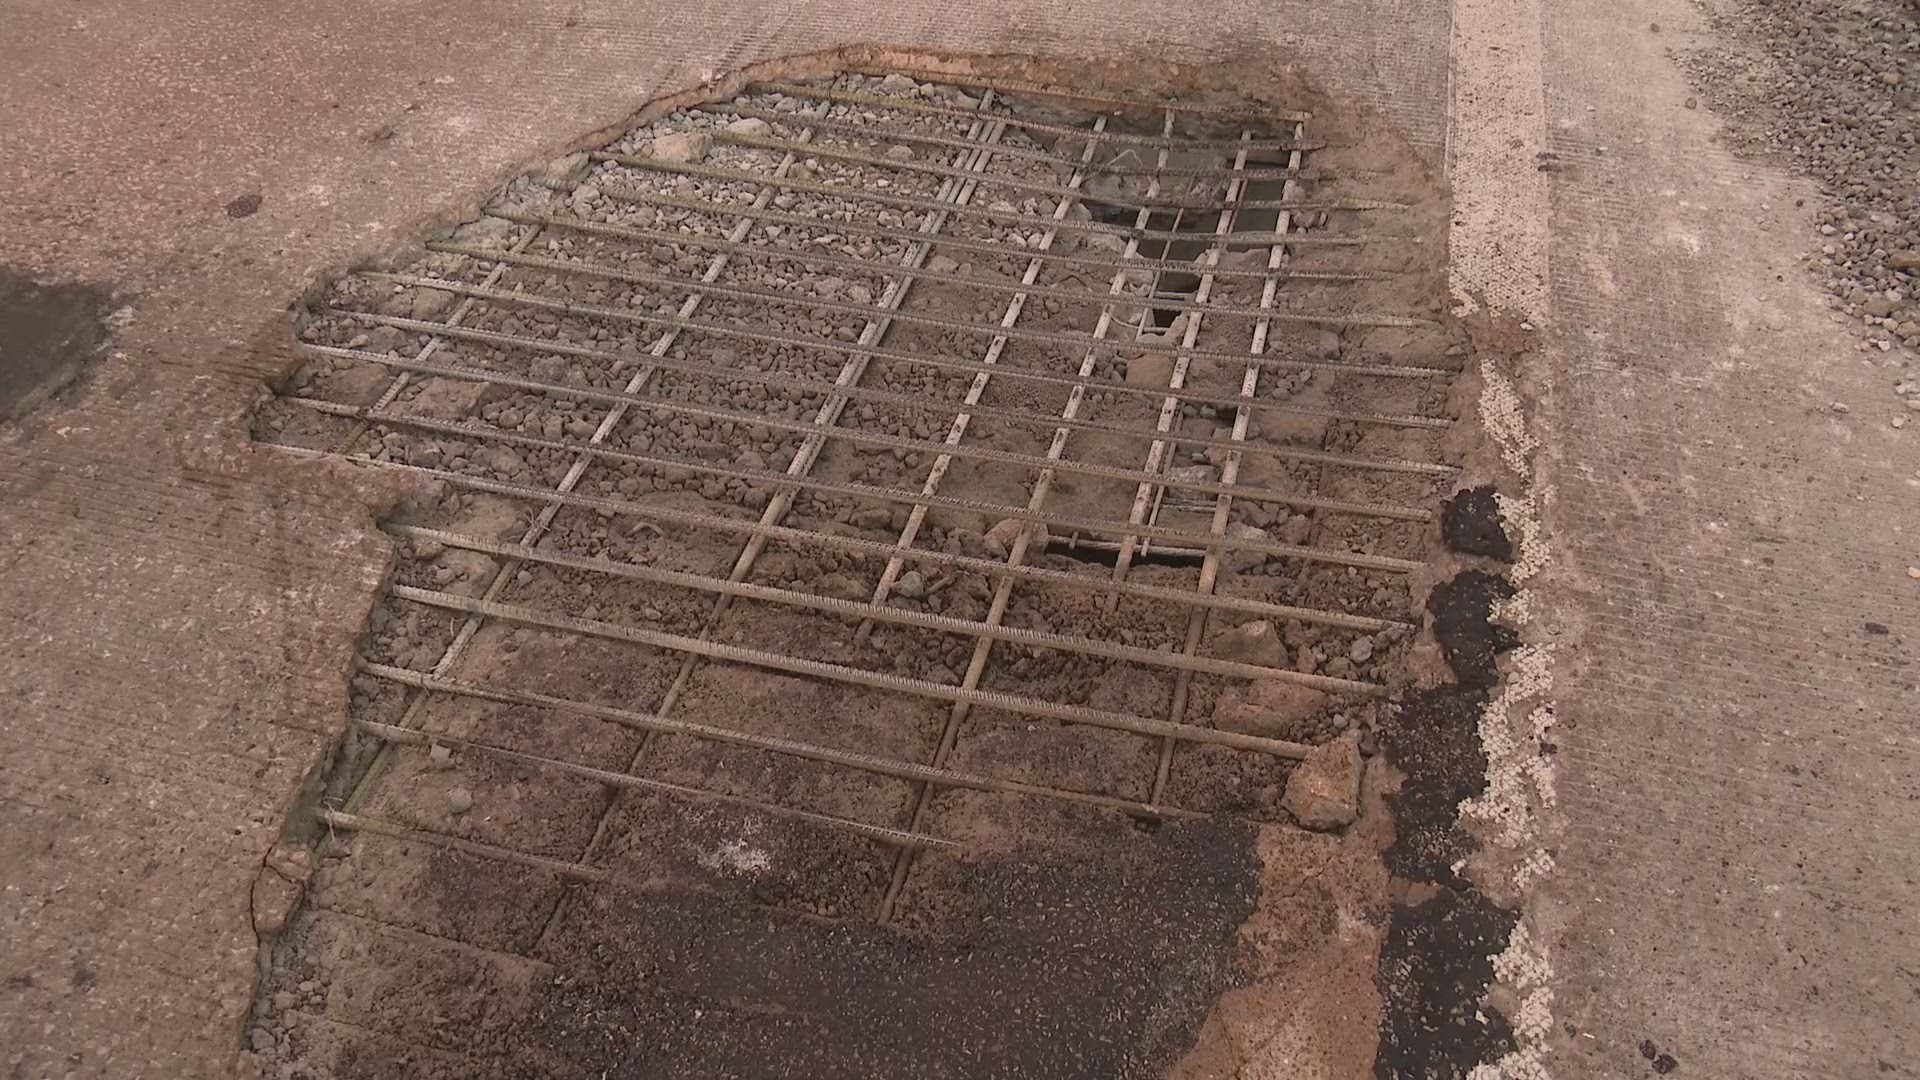 The road has crumbled away so much, the metal grid is visible in one of the largest potholes, and you can look down into the hole.